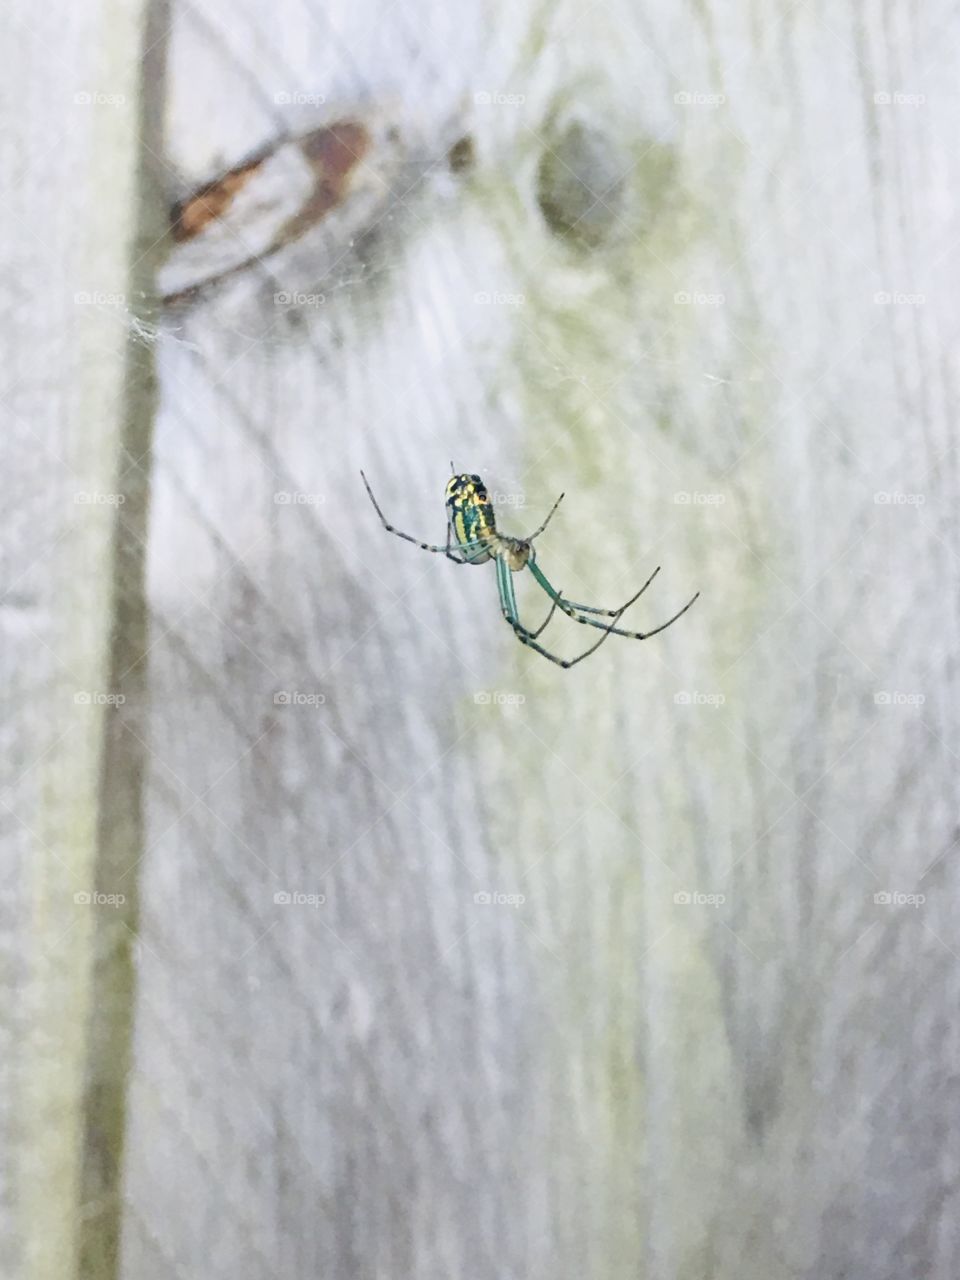 Emerald and yellow Spider